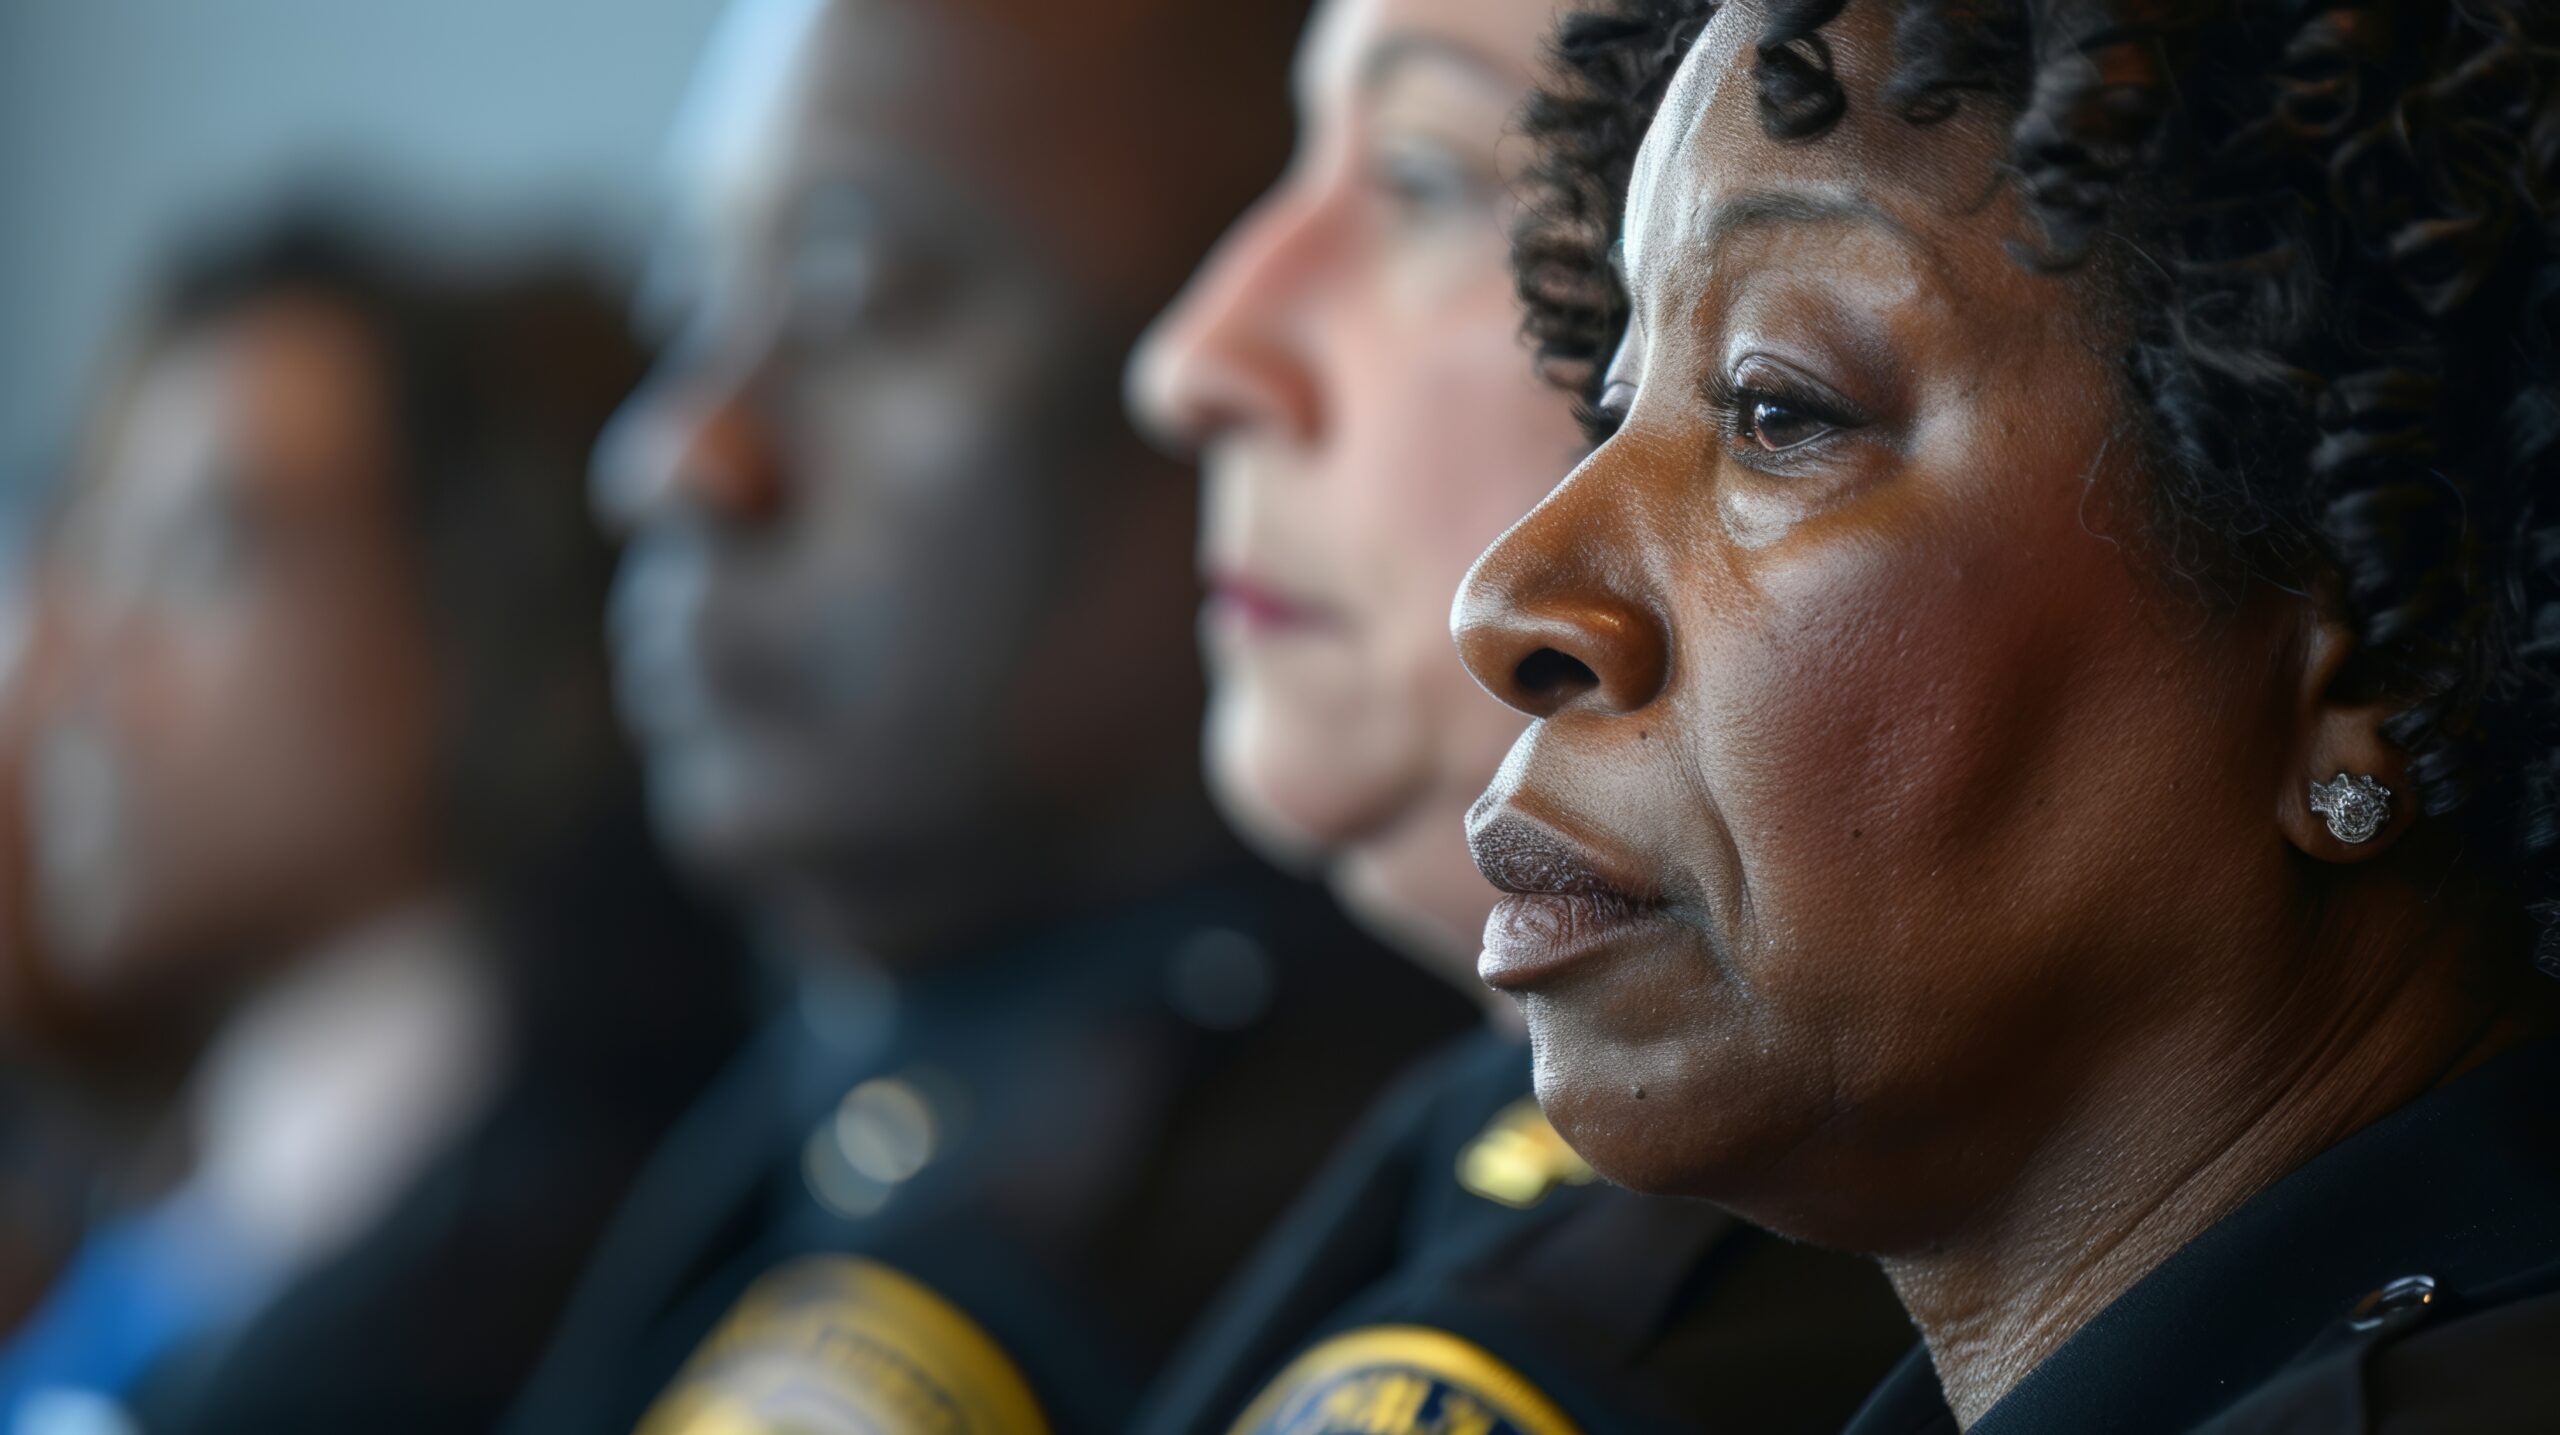 A press conference held by community leaders discussing the negative impact of riot policing on the trust and relationship between law enforcement and residents.